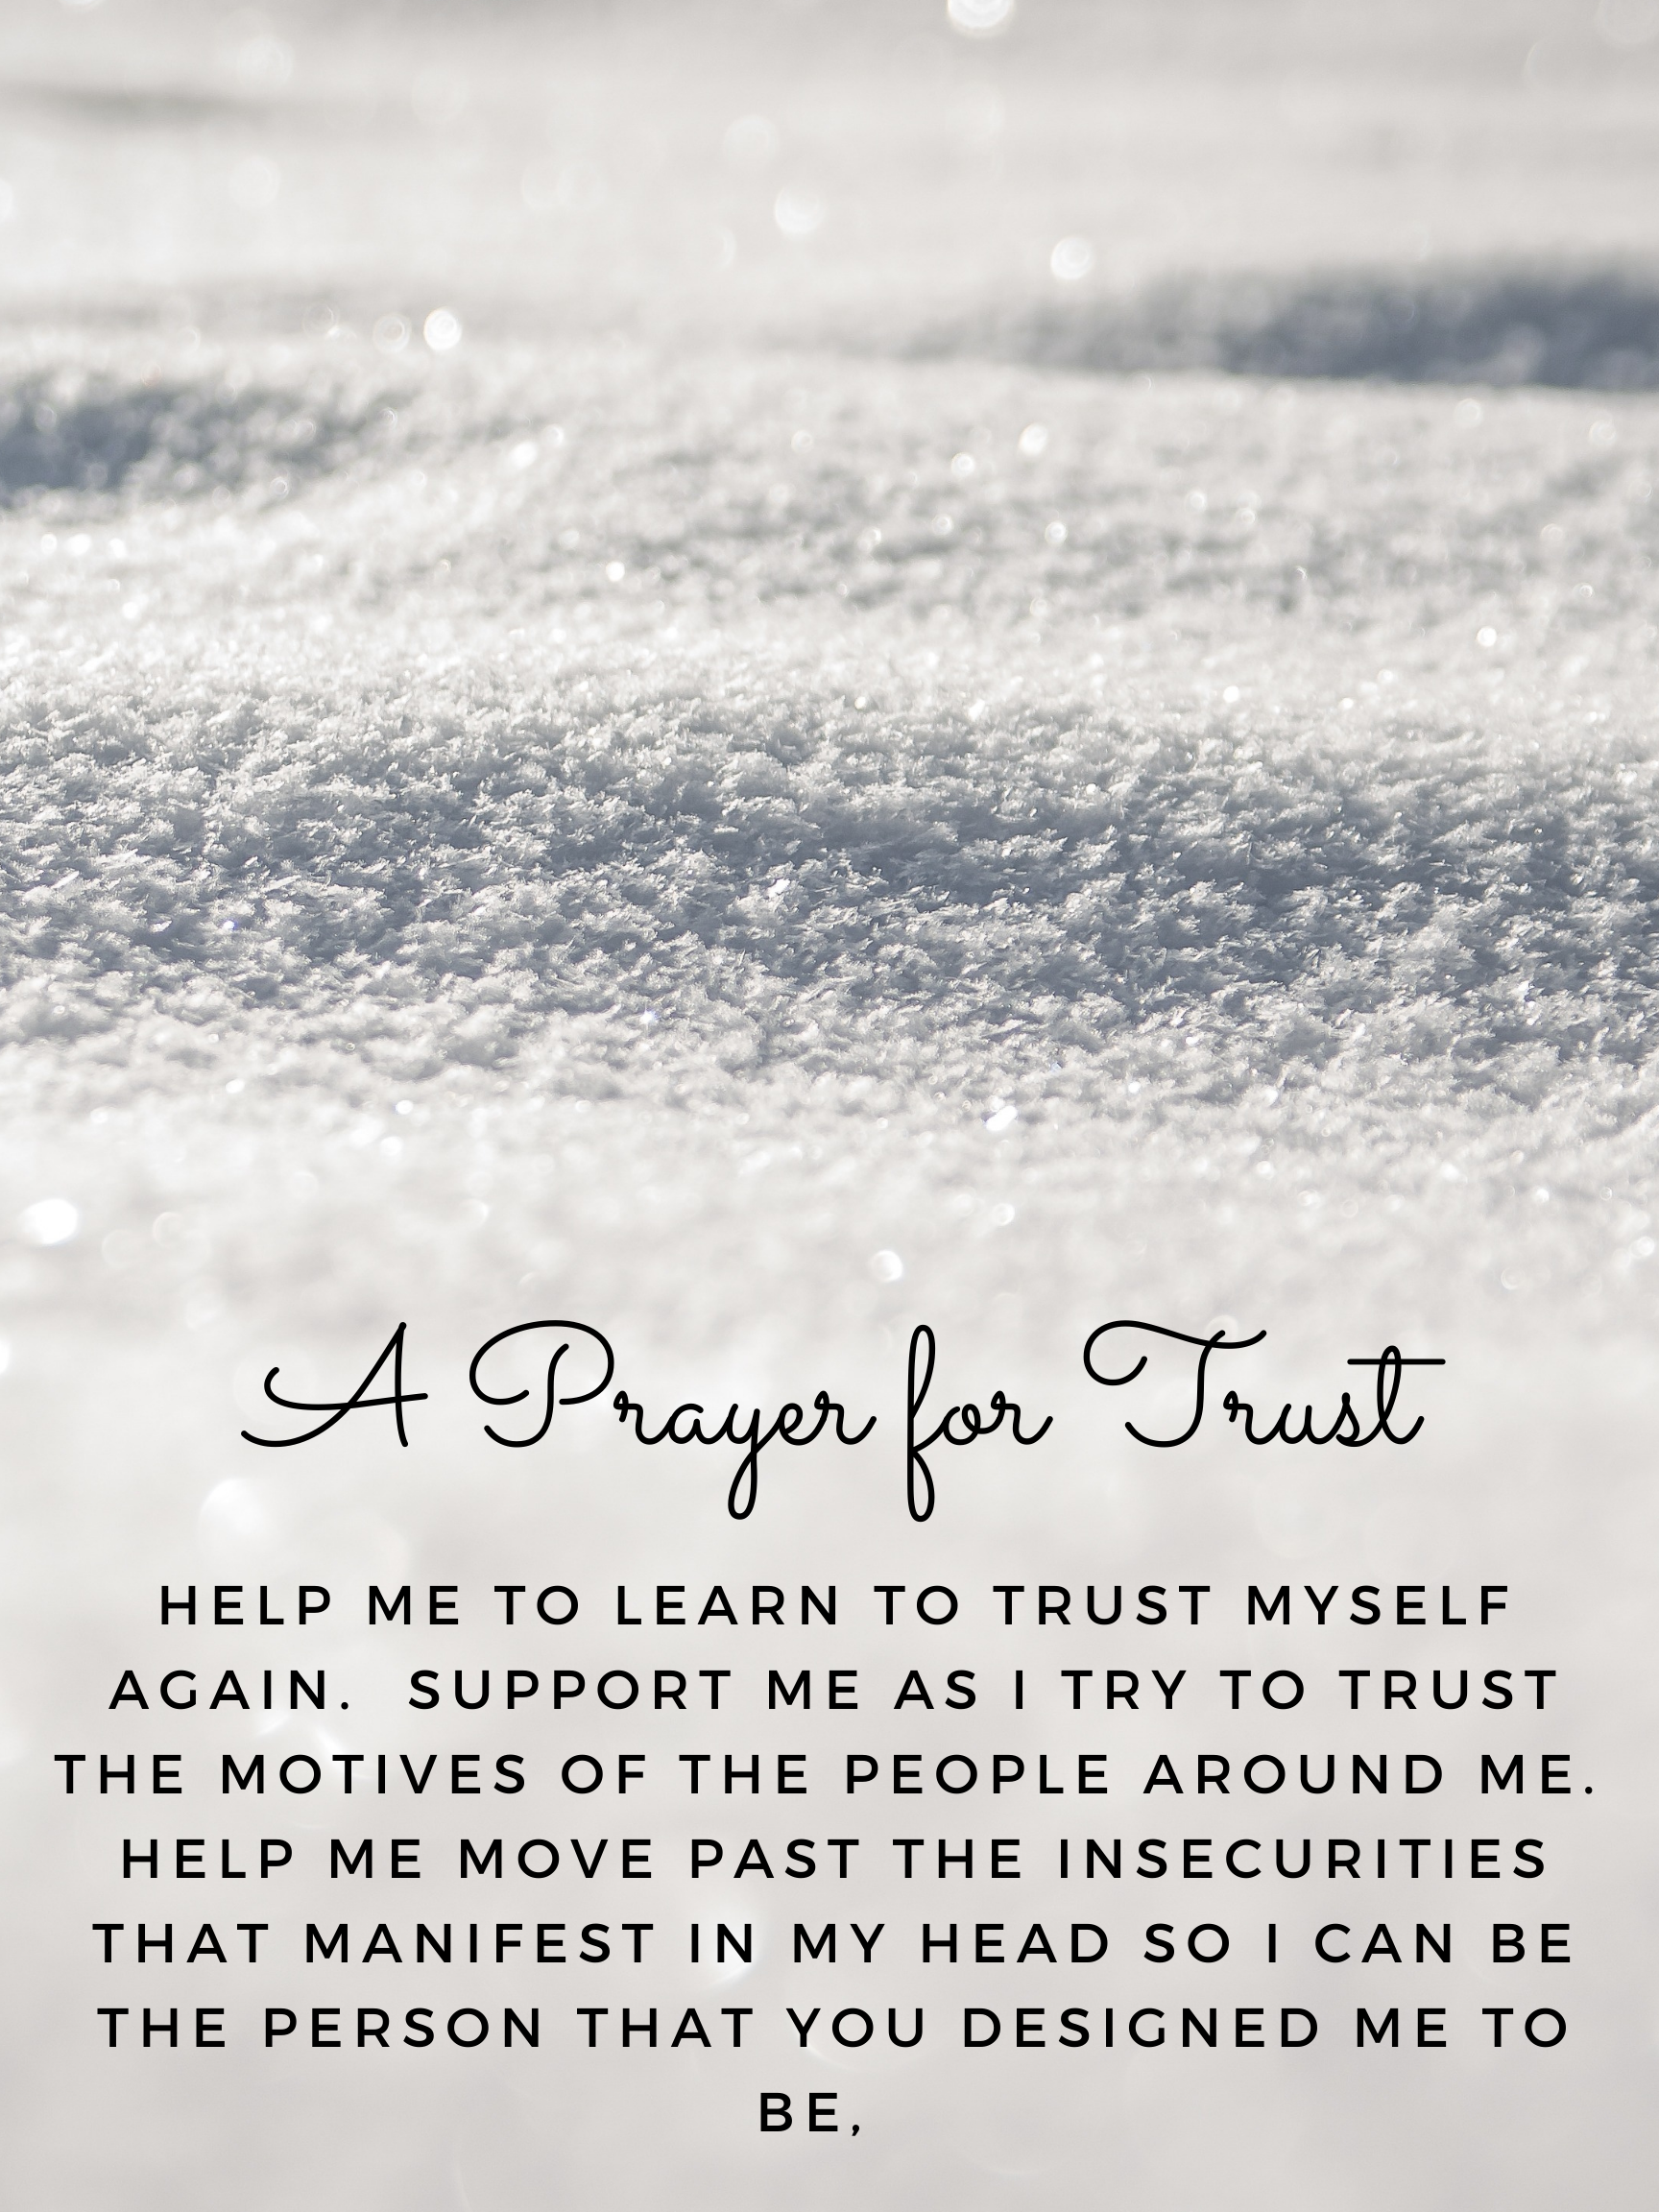 A Prayer for Trust - Help me to learn to trust myself again.  Support me as I try to trust the motives of the people around me.  Help me move past the insecurities that manifest in my head so I can be the person that you designed me to be.